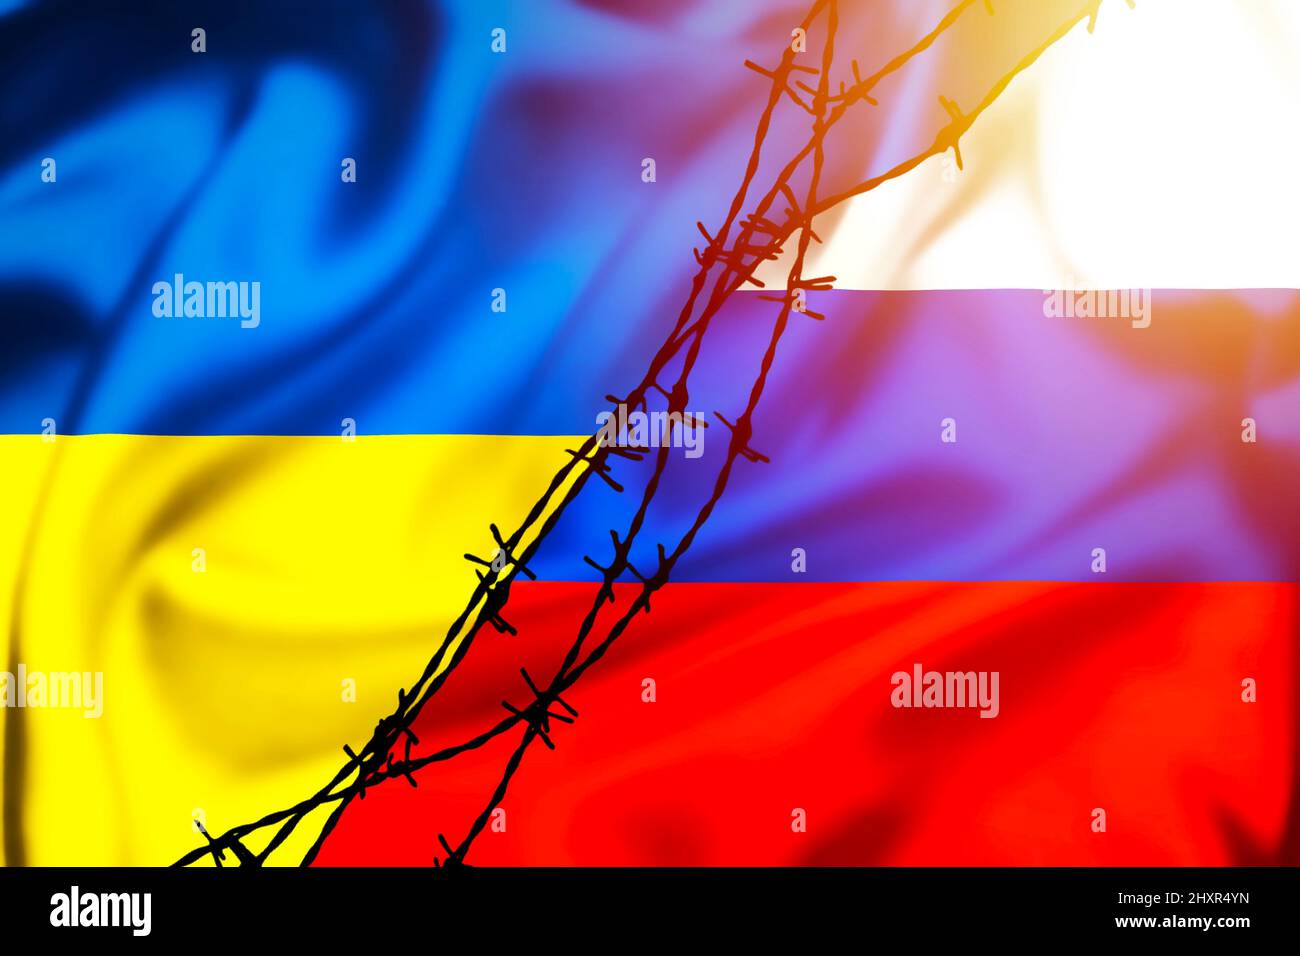 Silk flags of Russian Federation and Ukraine divided by barb wire sun haze illustration, concept of tense relations between Ukraine and Russia Stock Photo